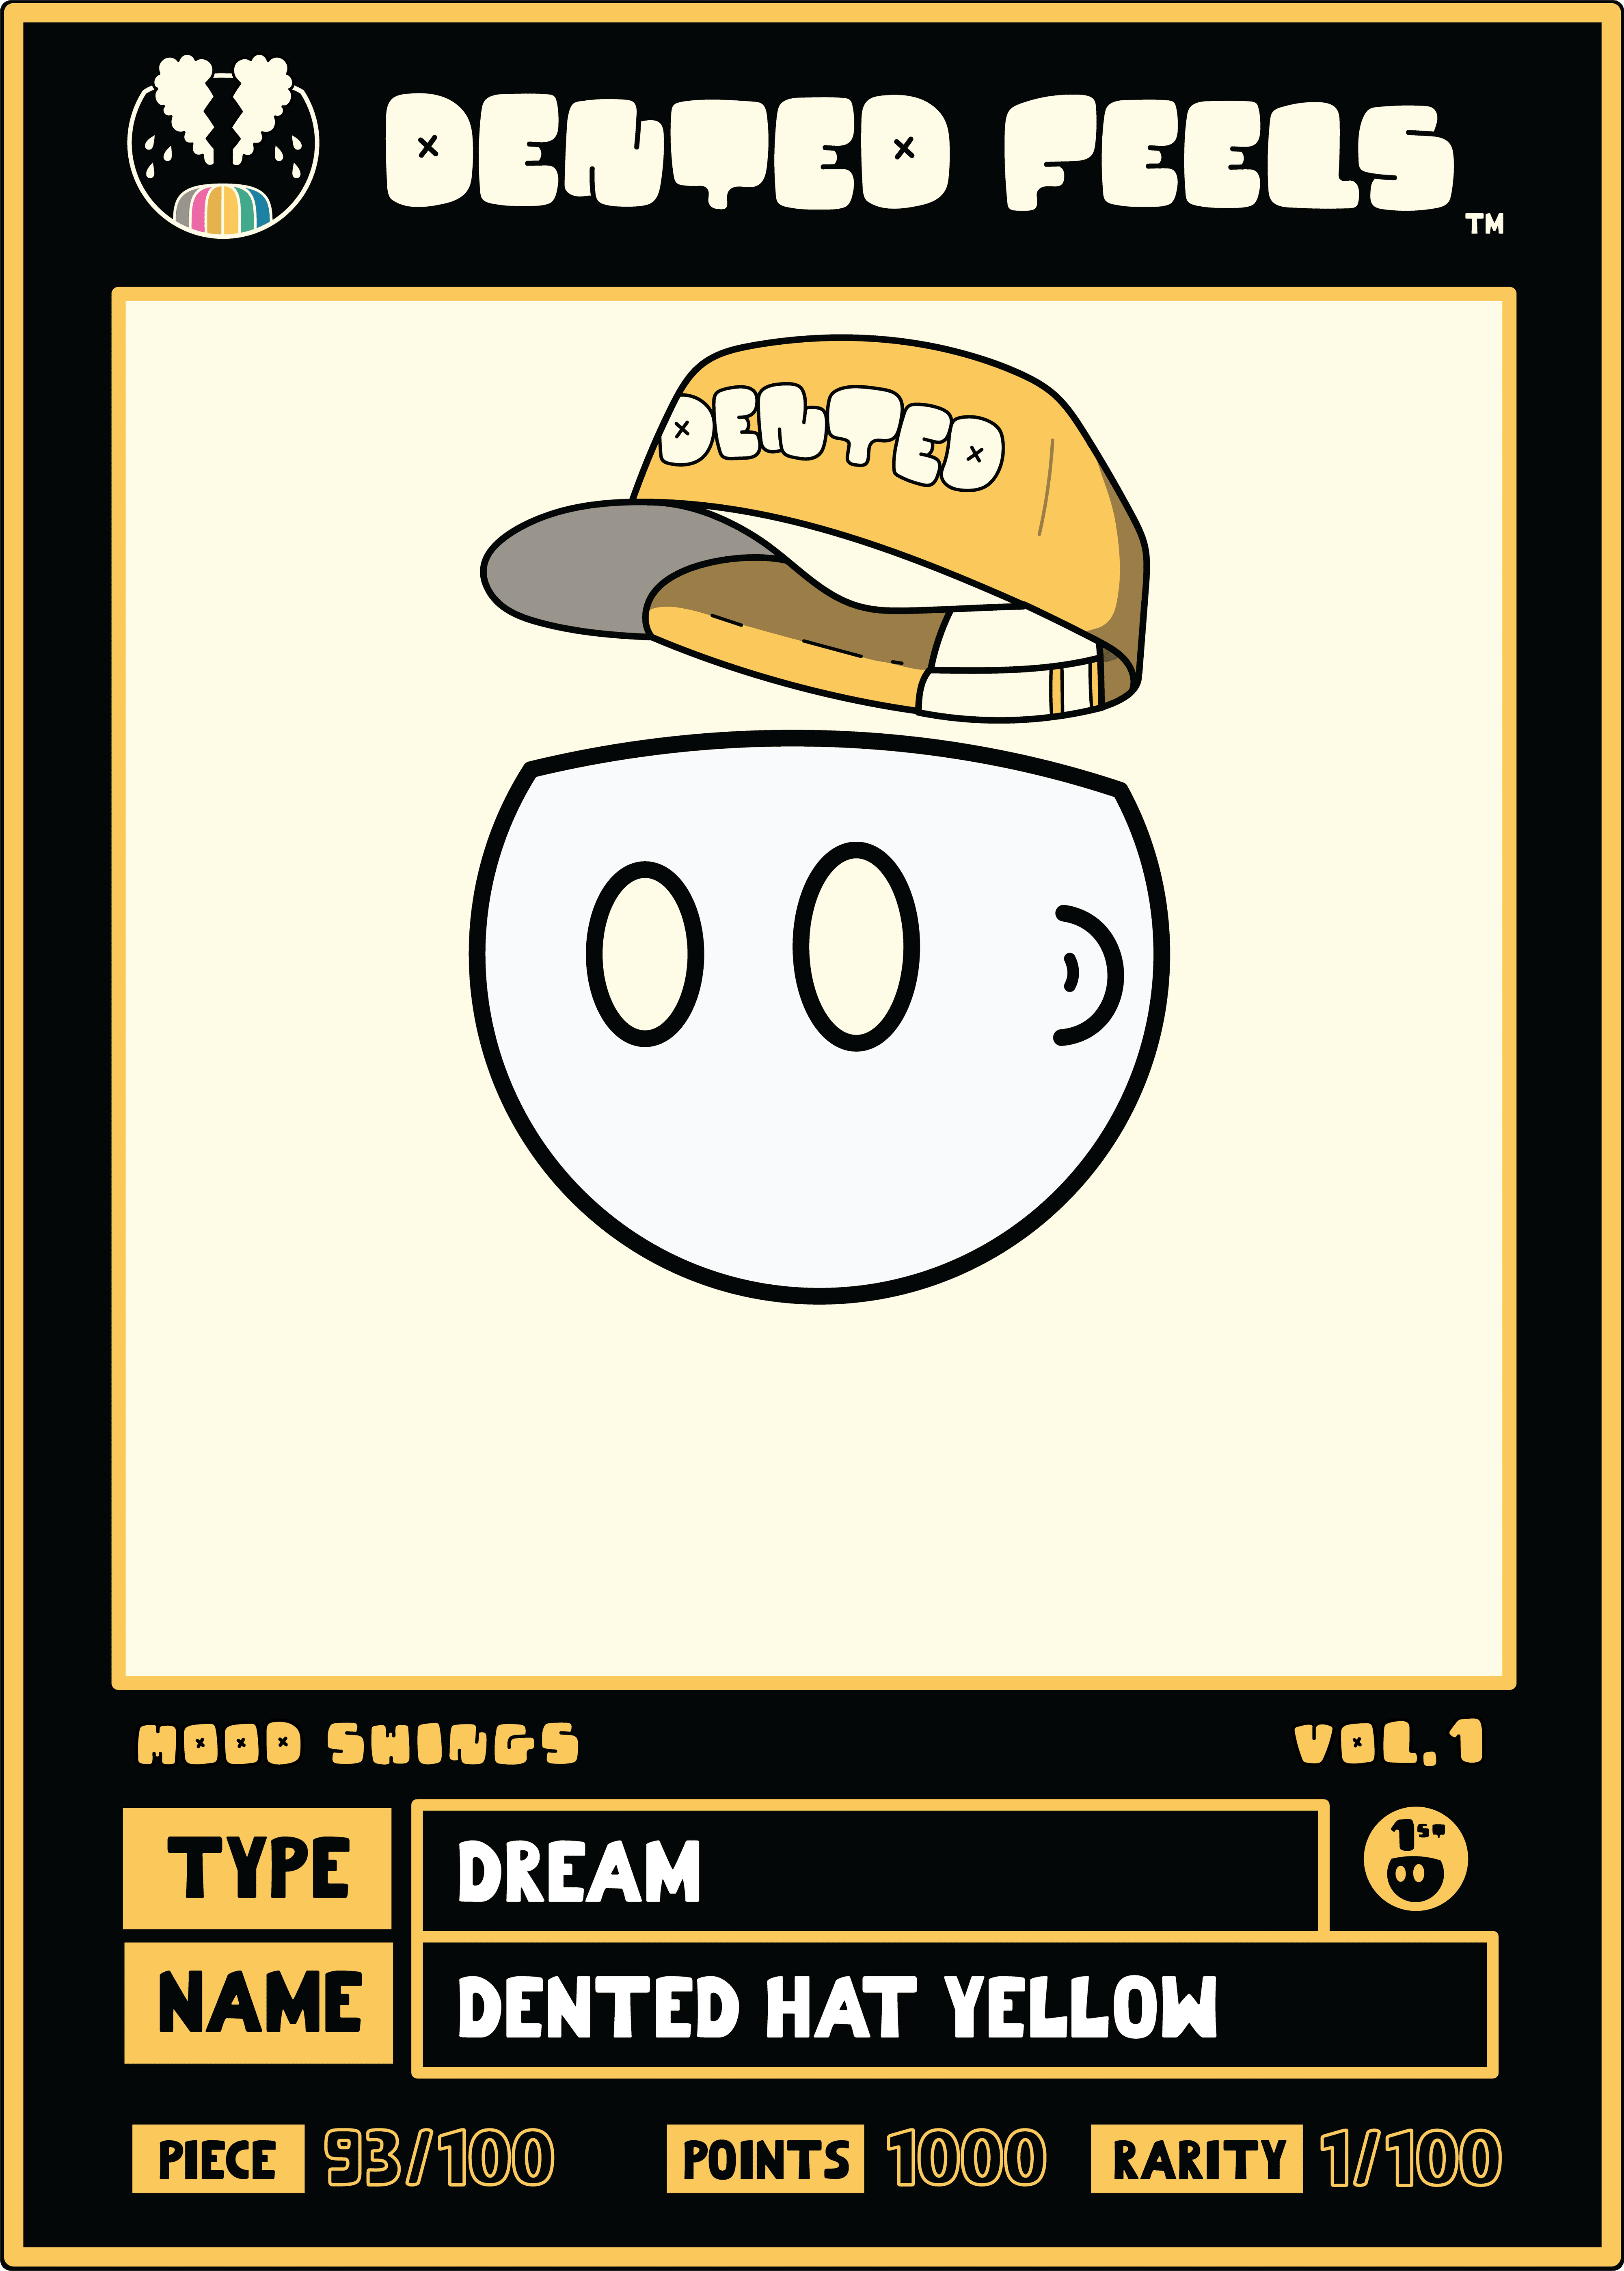 Dented Hat Yellow